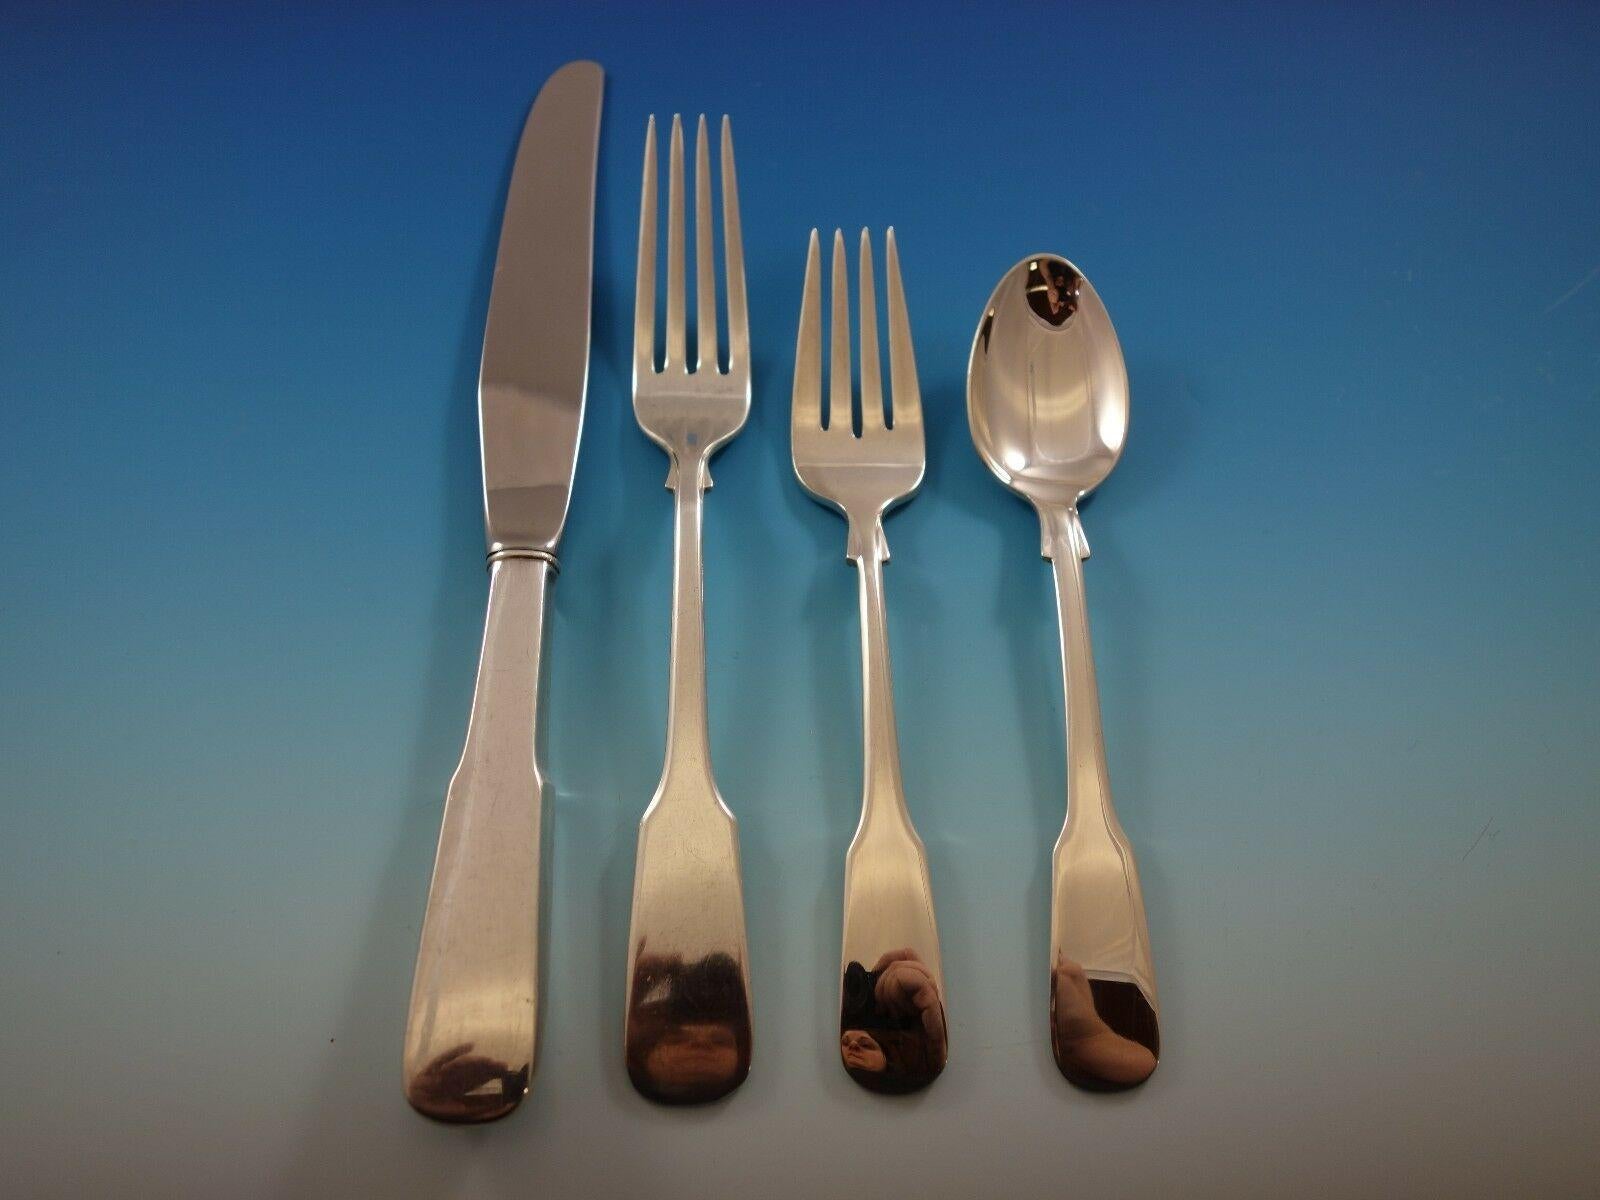 Monumental Eighteen ten (1810) by International sterling silver flatware set - 195 pieces. This set includes:

Measures: 48 knives, 9